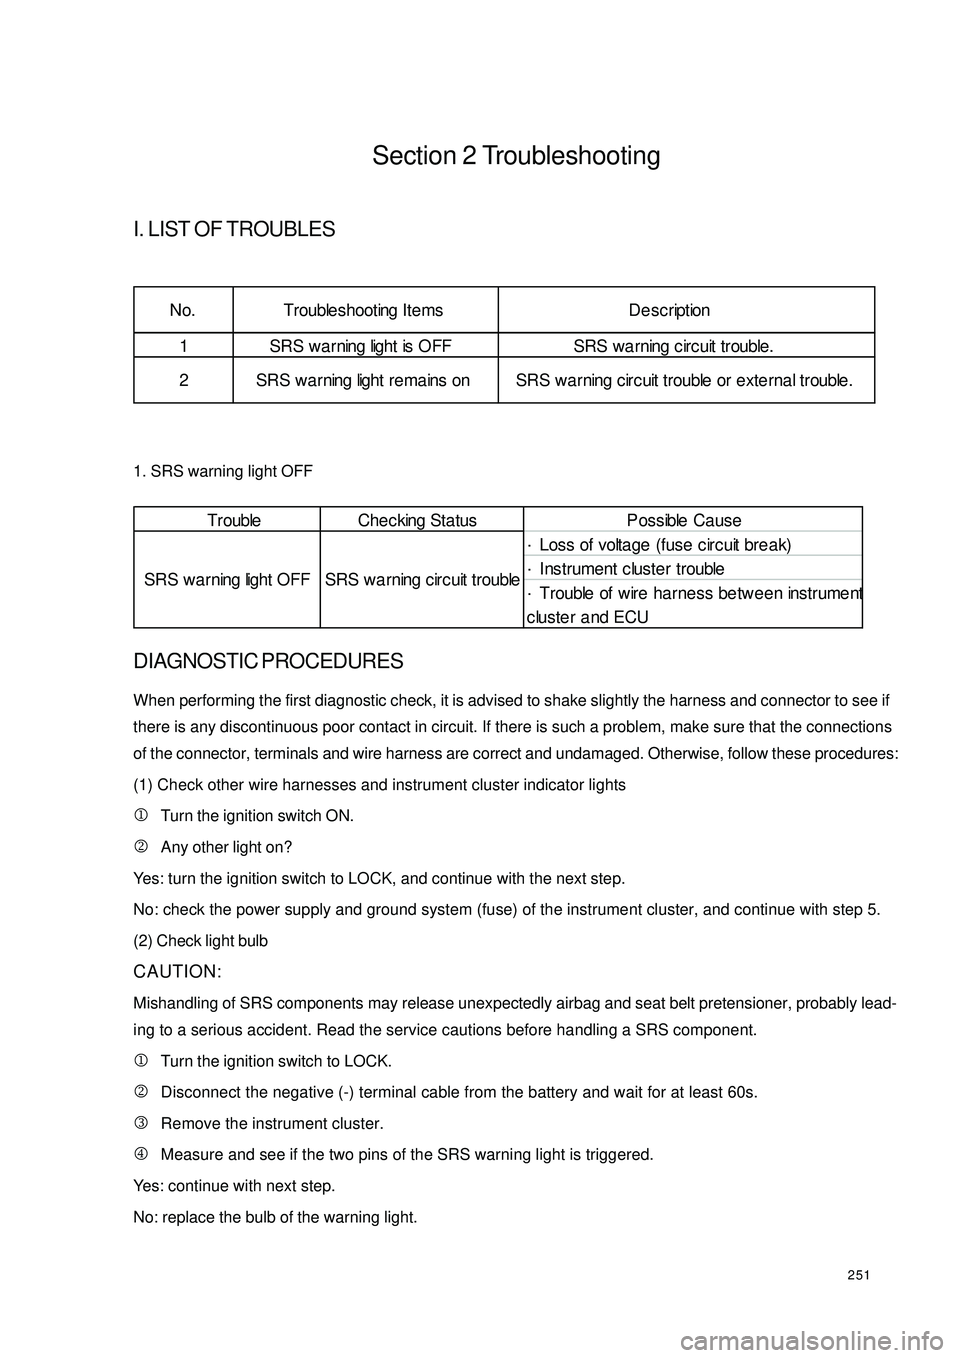 GEELY CK 2008  Workshop Manual 251Section 2 TroubleshootingI. LIST OF TROUBLES1. SRS warning light OFFDIAGNOSTIC PROCEDURESWhen performing the first diagnostic check, it is advised to shake slightly the harness and connector to see